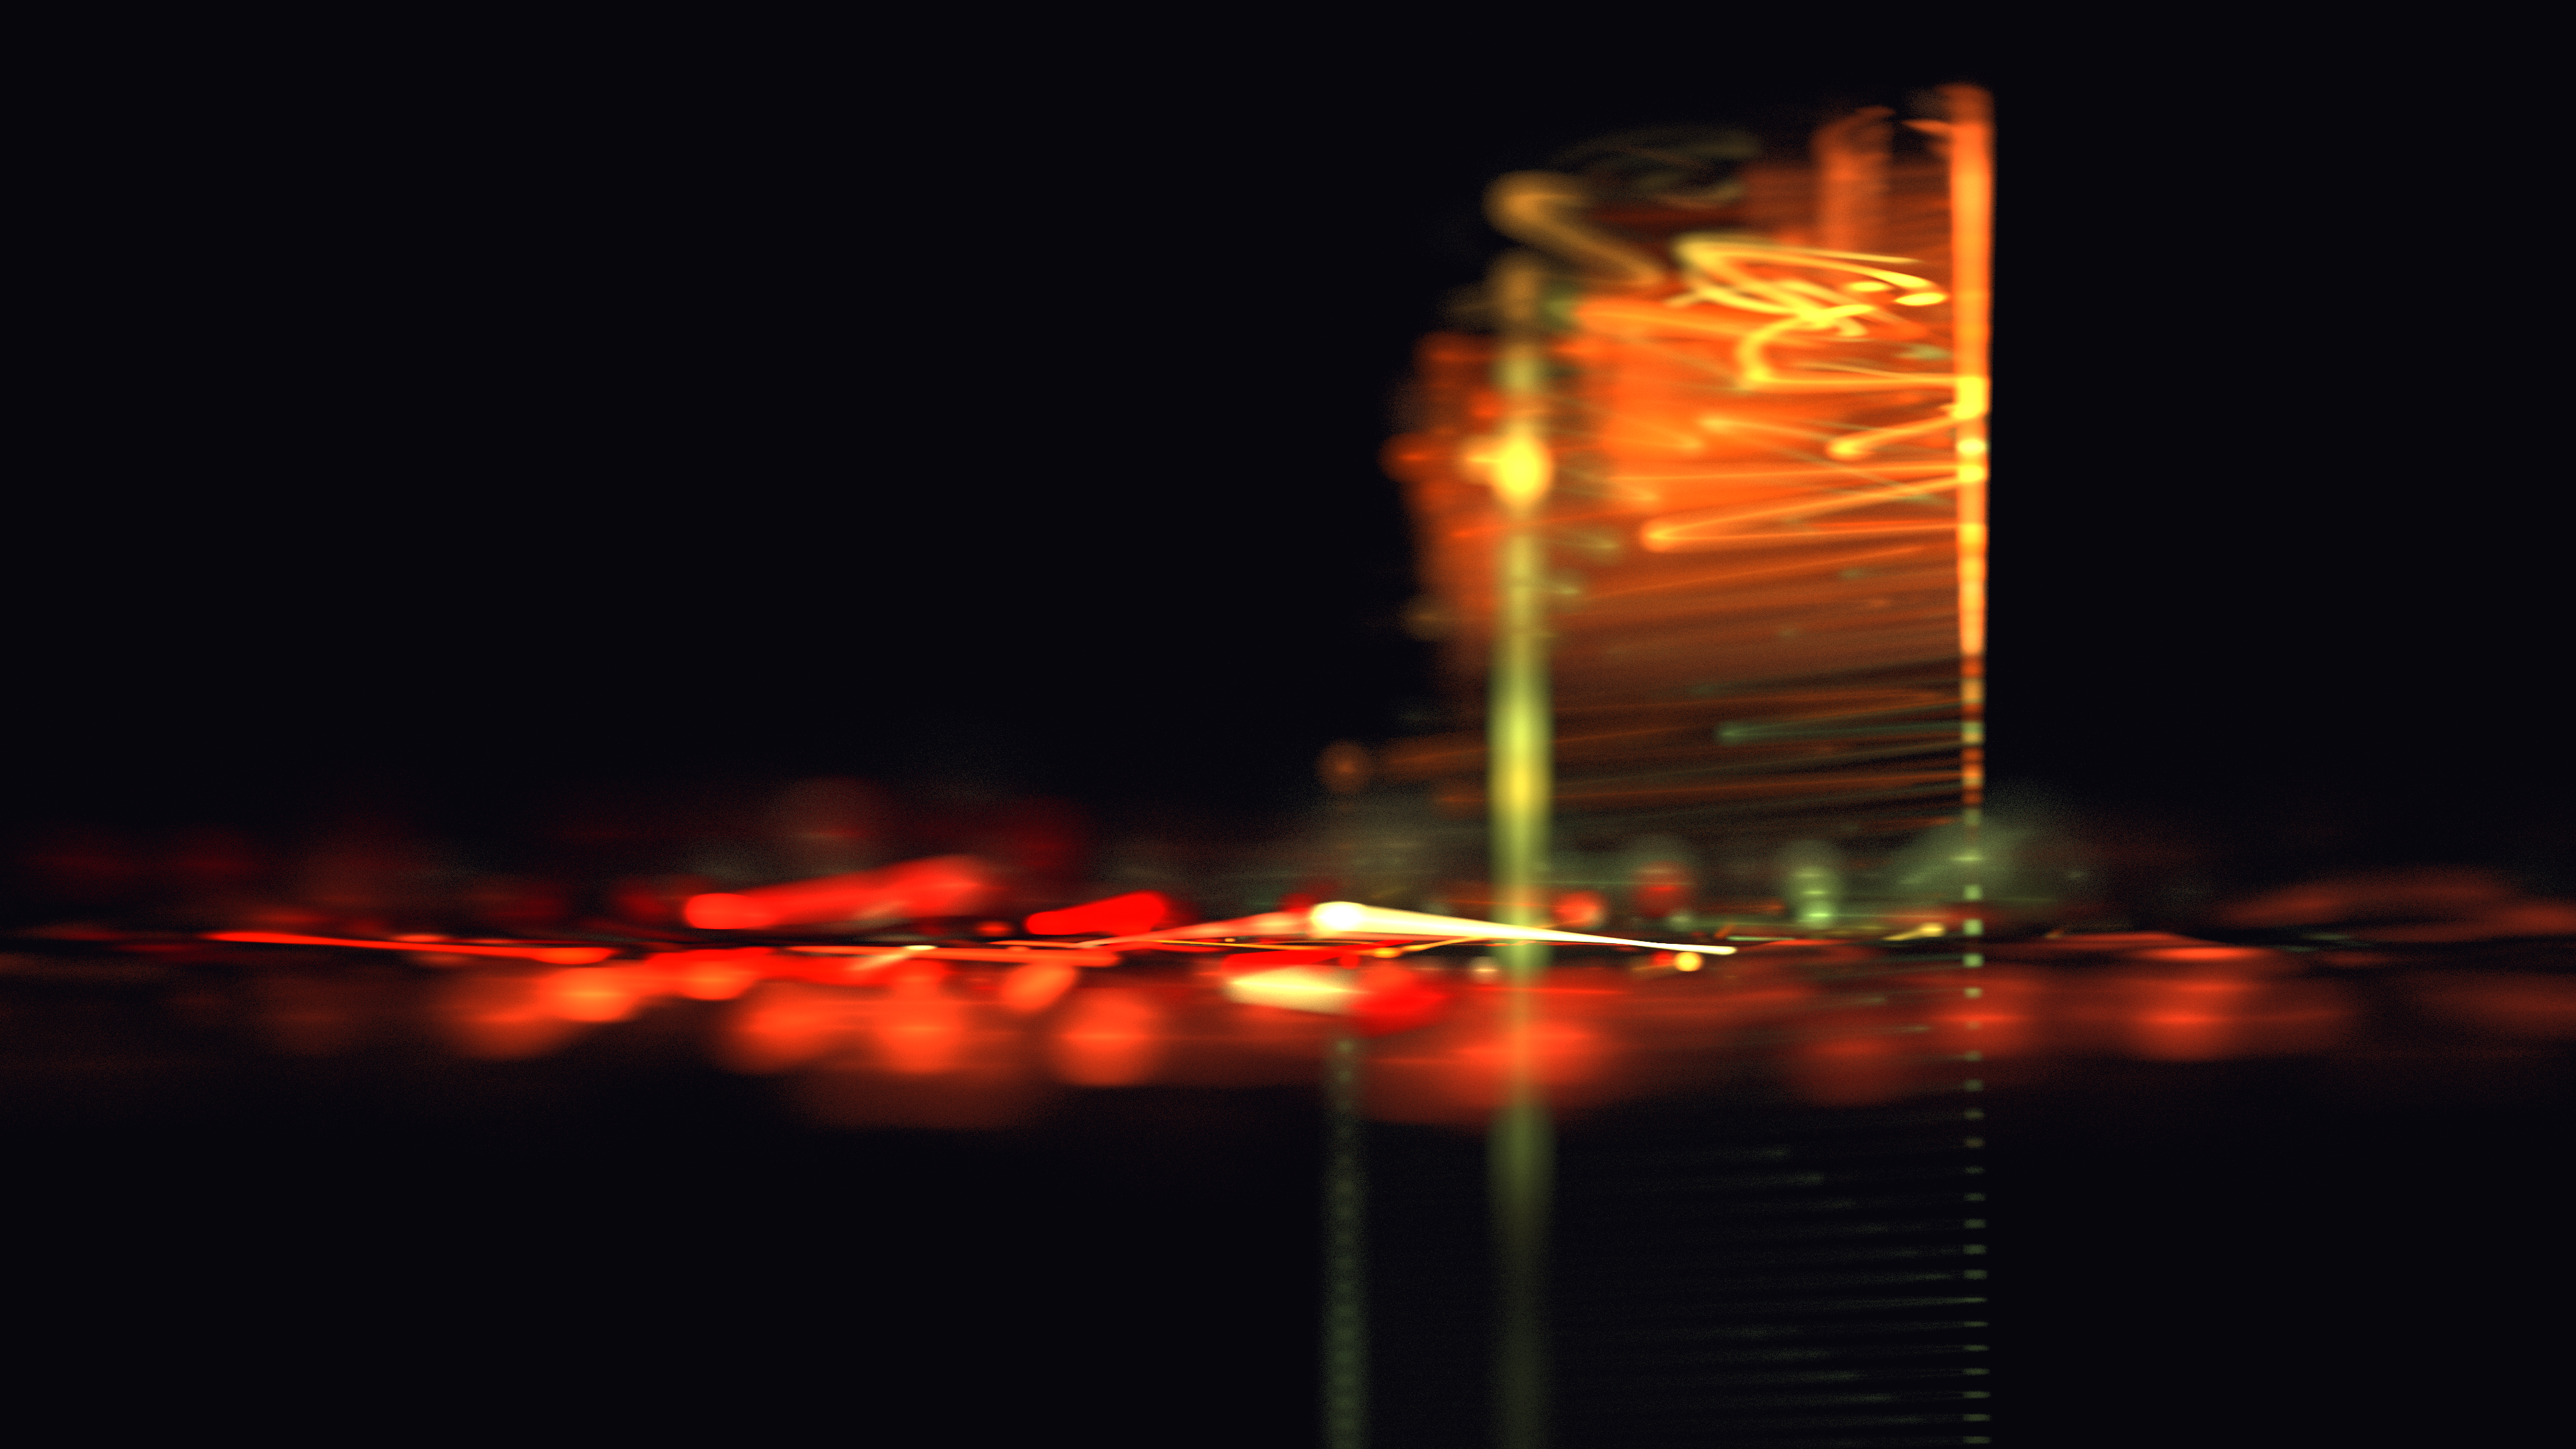 Abstract 3D Abstract Apophysis 3840x2160